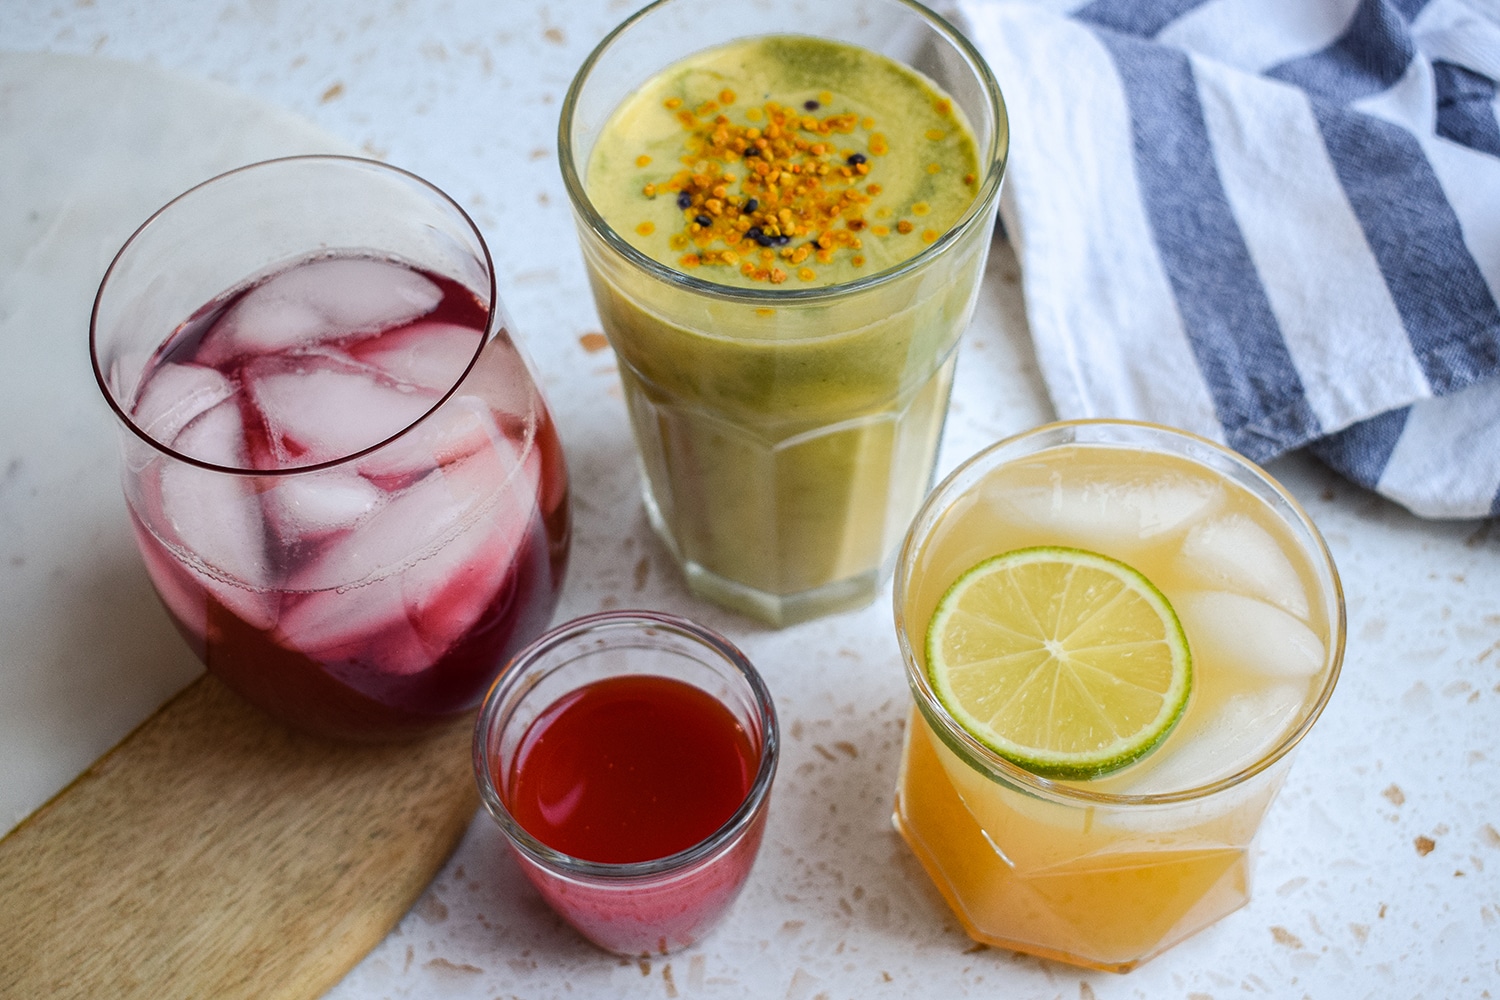 Non-alcoholic juice drinks made with Borough Market ingredients